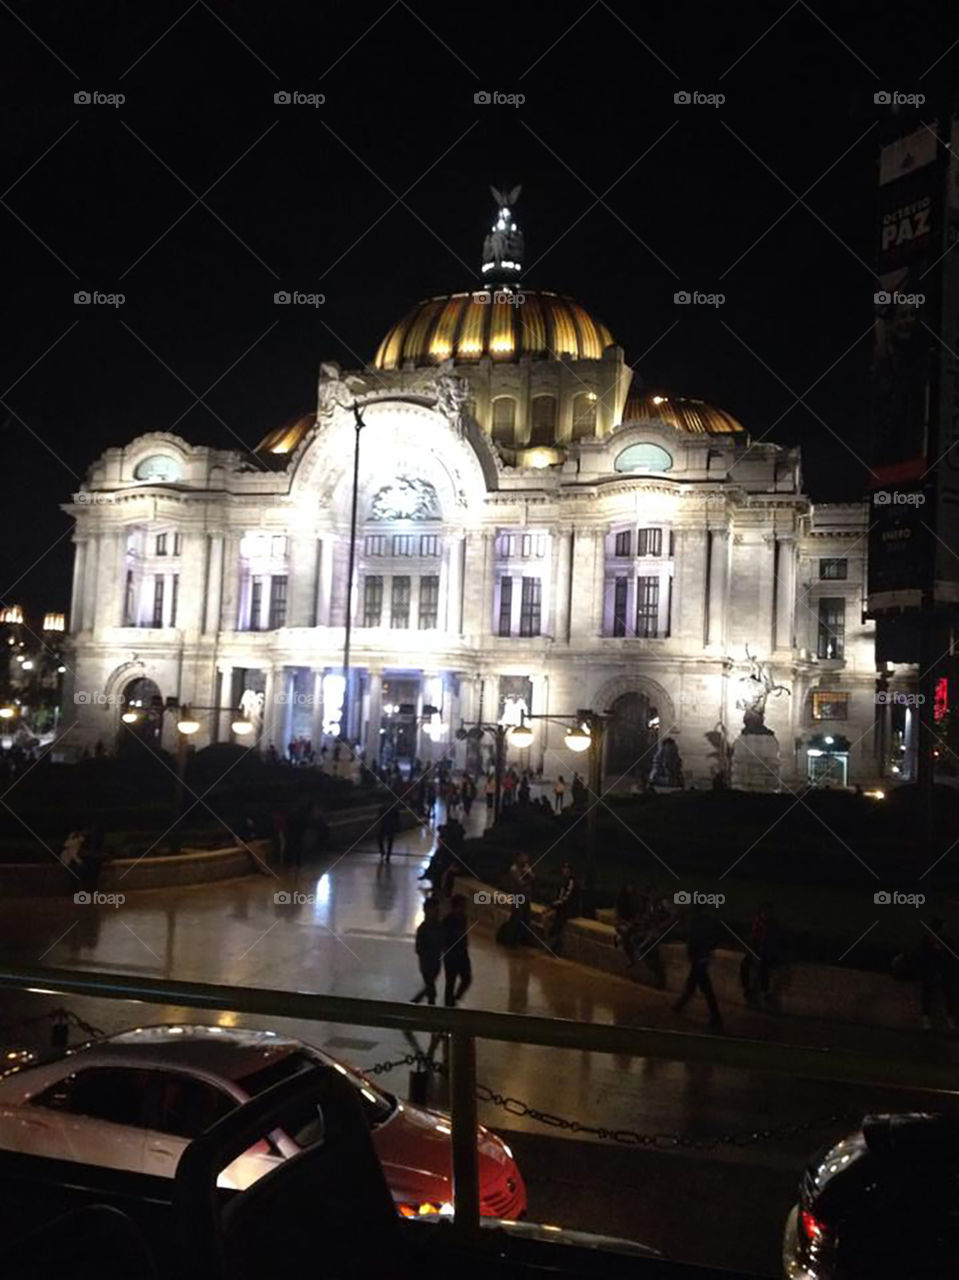 Mexico city is outstanding